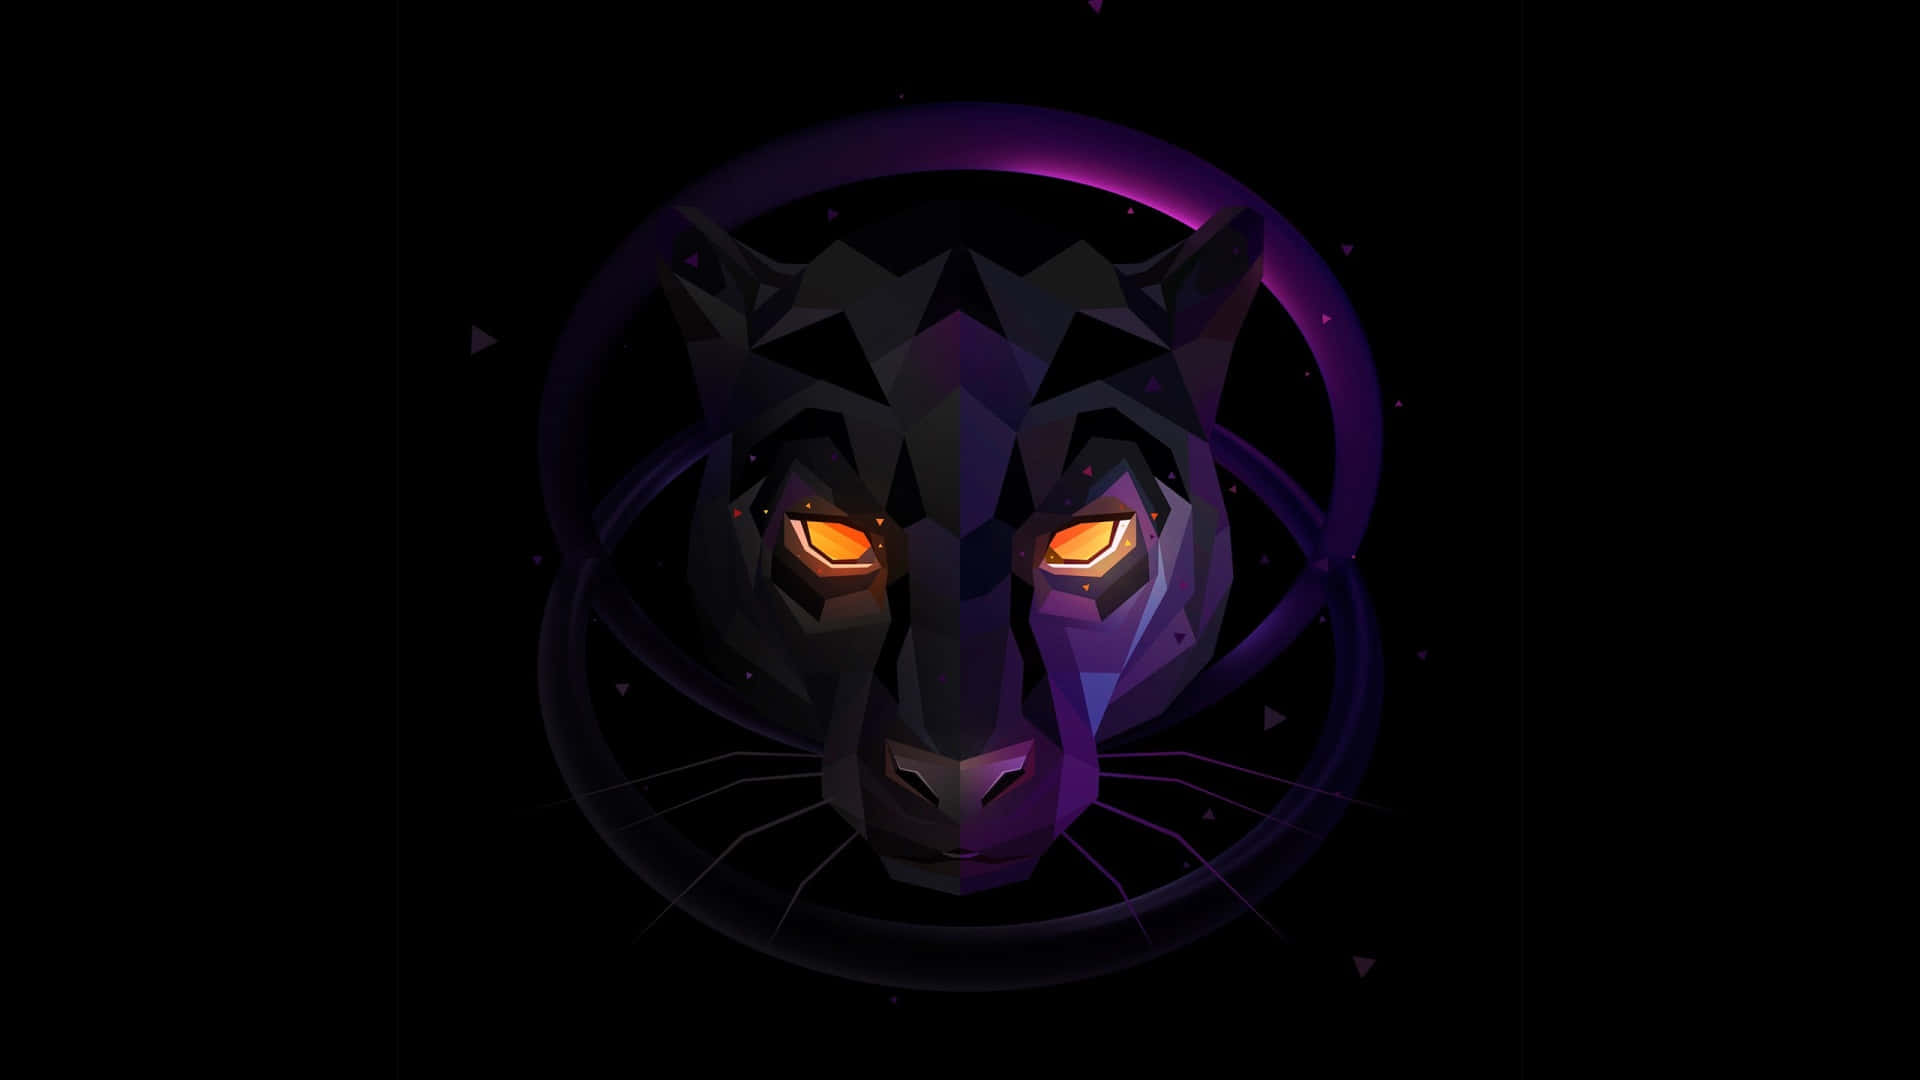 A Black Cat With Purple Eyes On A Black Background Wallpaper